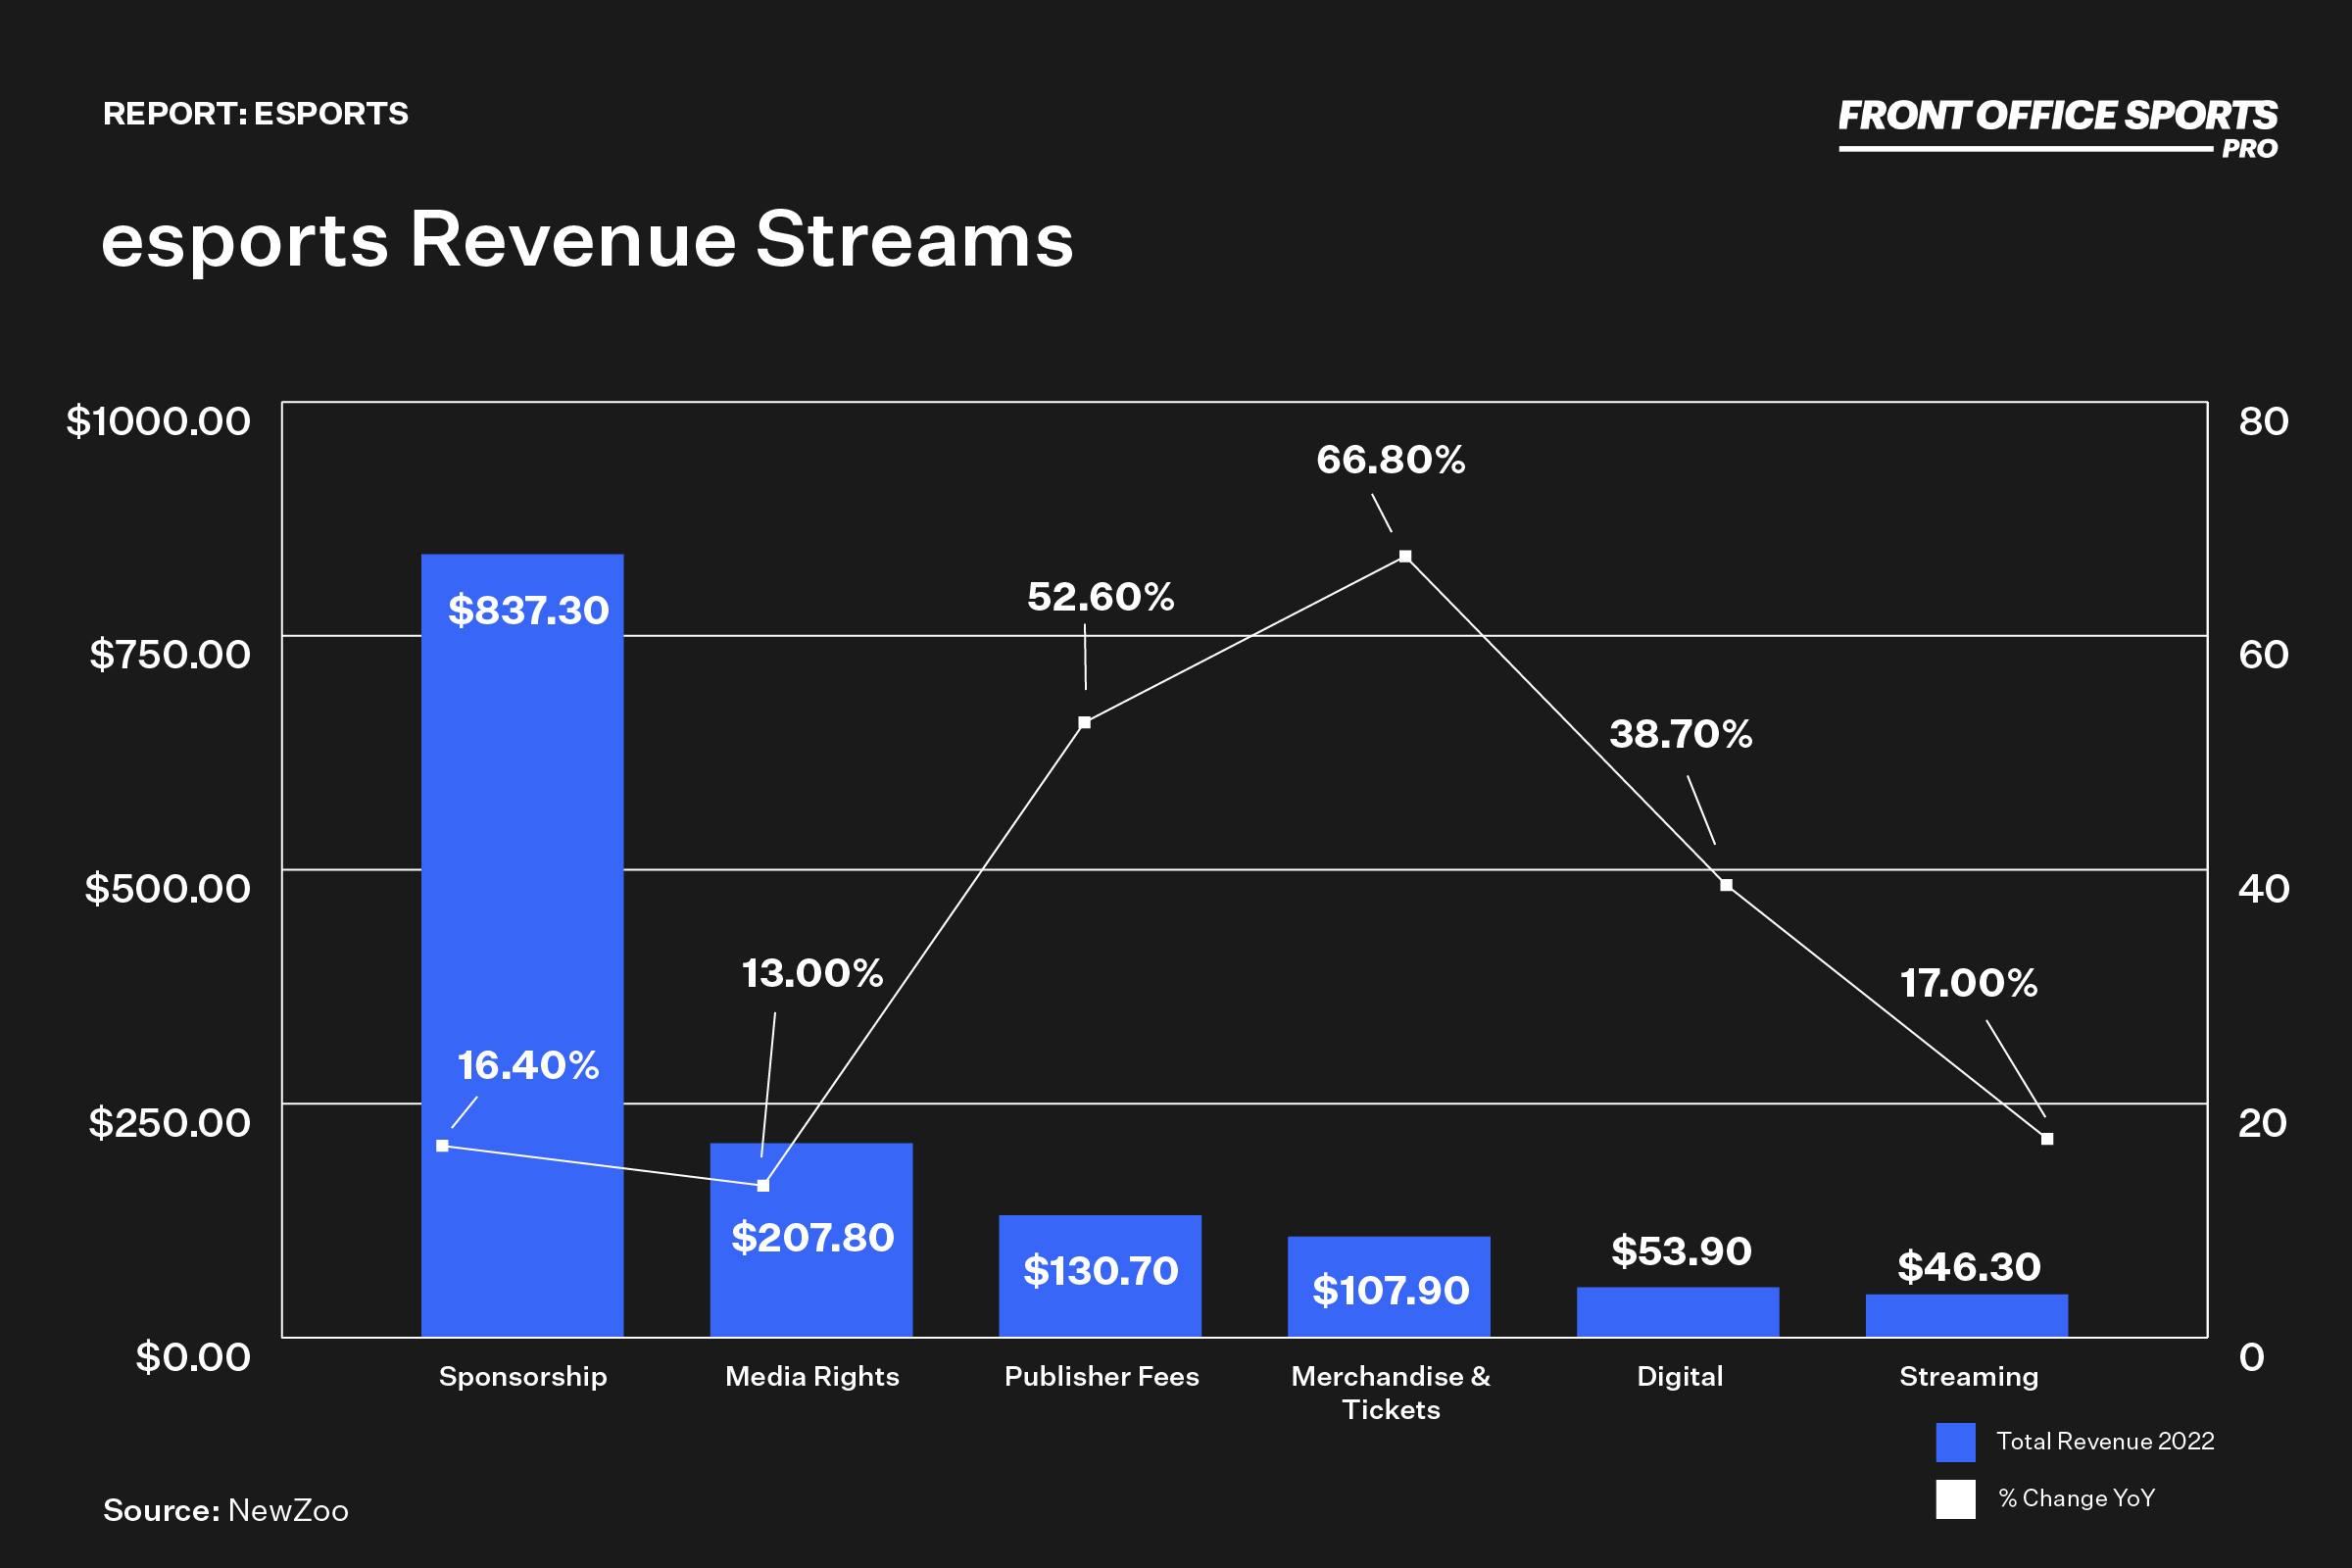 361 Degrees credits esports, e-commerce for sales growth - Inside